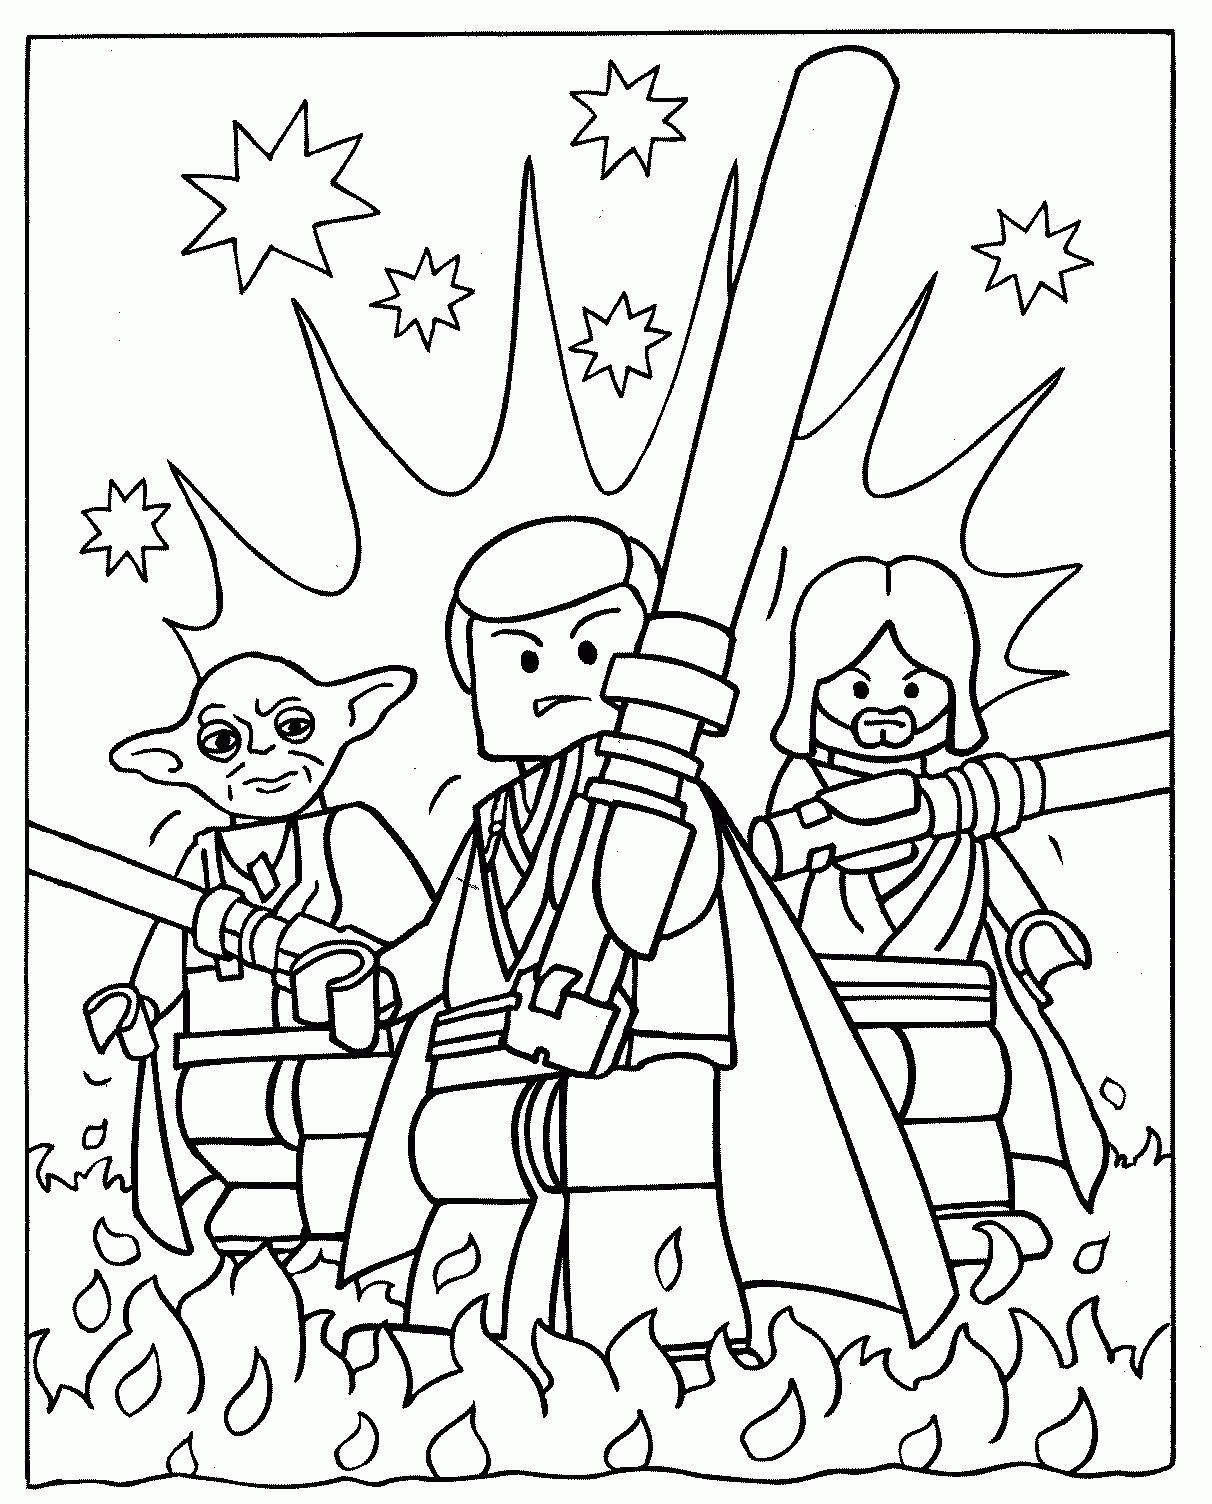 Popular Free Printable Star Wars Coloring Pages For Kids - Widetheme